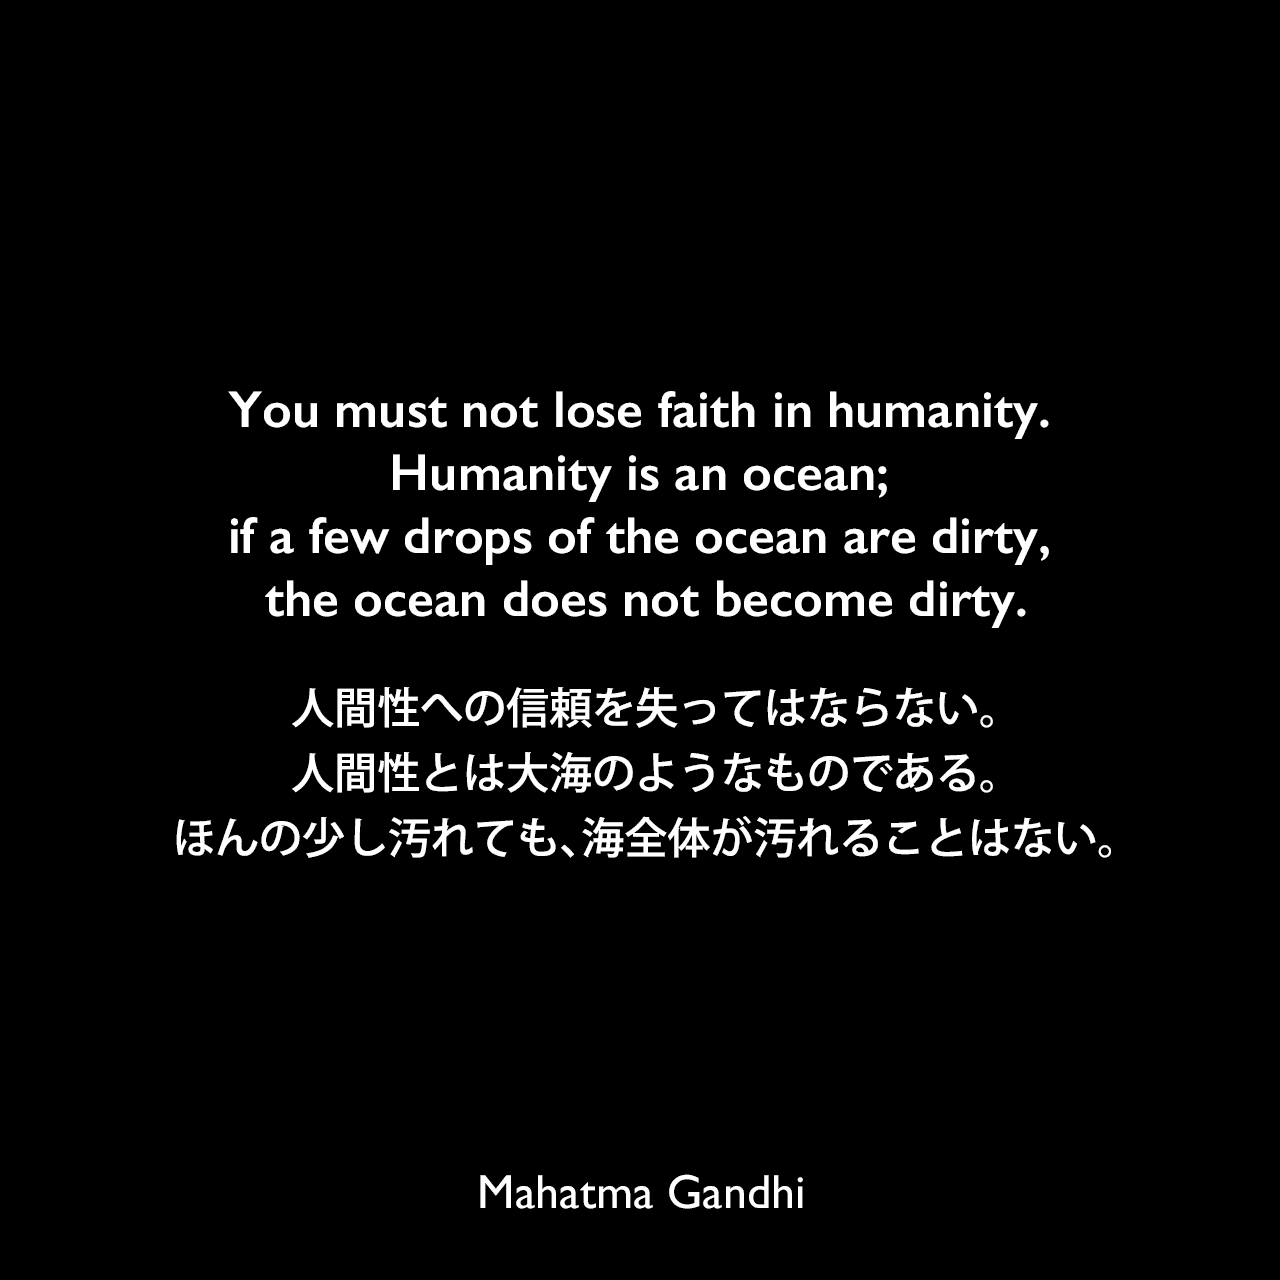 You must not lose faith in humanity. Humanity is an ocean; if a few drops of the ocean are dirty, the ocean does not become dirty.人間性への信頼を失ってはならない。人間性とは大海のようなものである。ほんの少し汚れても、海全体が汚れることはない。Mahatma Gandhi